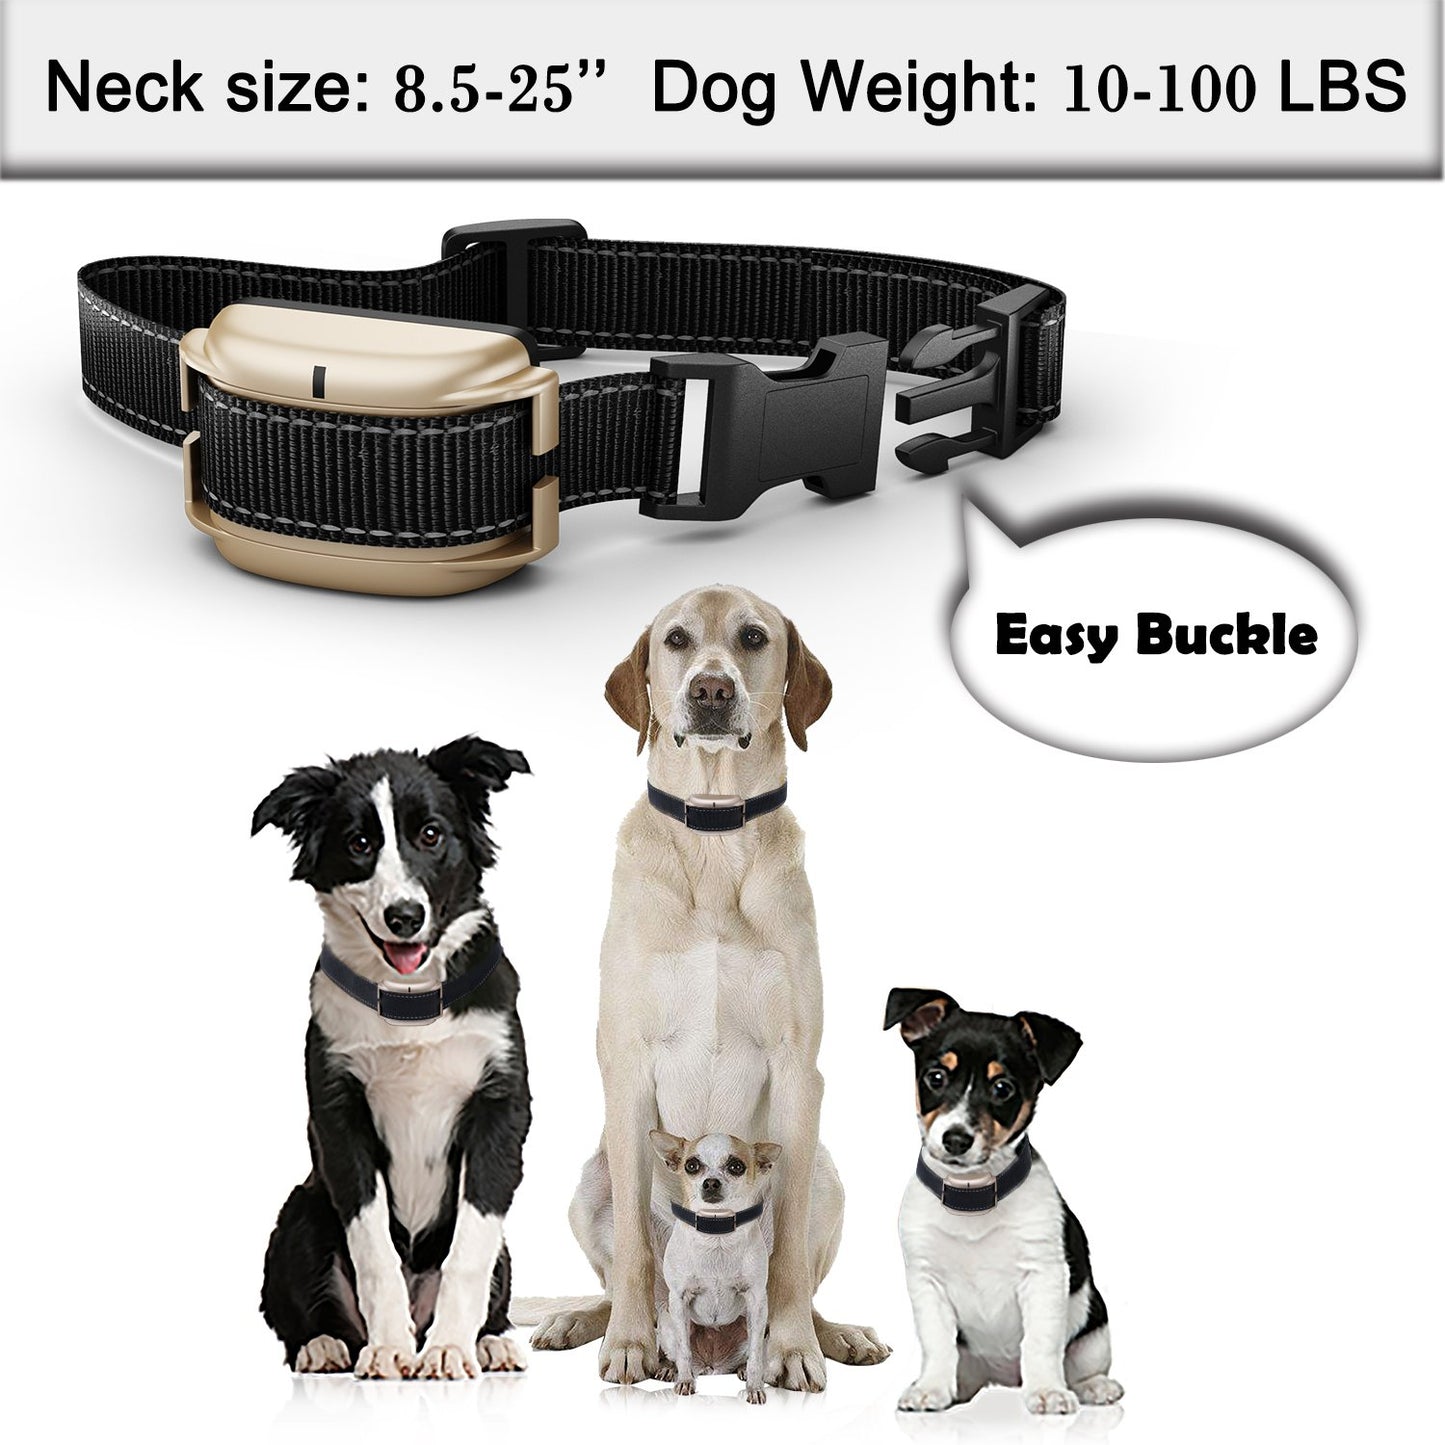 PETDIARY Remote Dog Static Shock Training Collar 1970Ft Long Range with Beep/Light/Vibration/Static Shock, Waterproof, Rechargeable, Dogs 10Lbs to 100Lbs with Neck Sizes of 8.5-25 inches